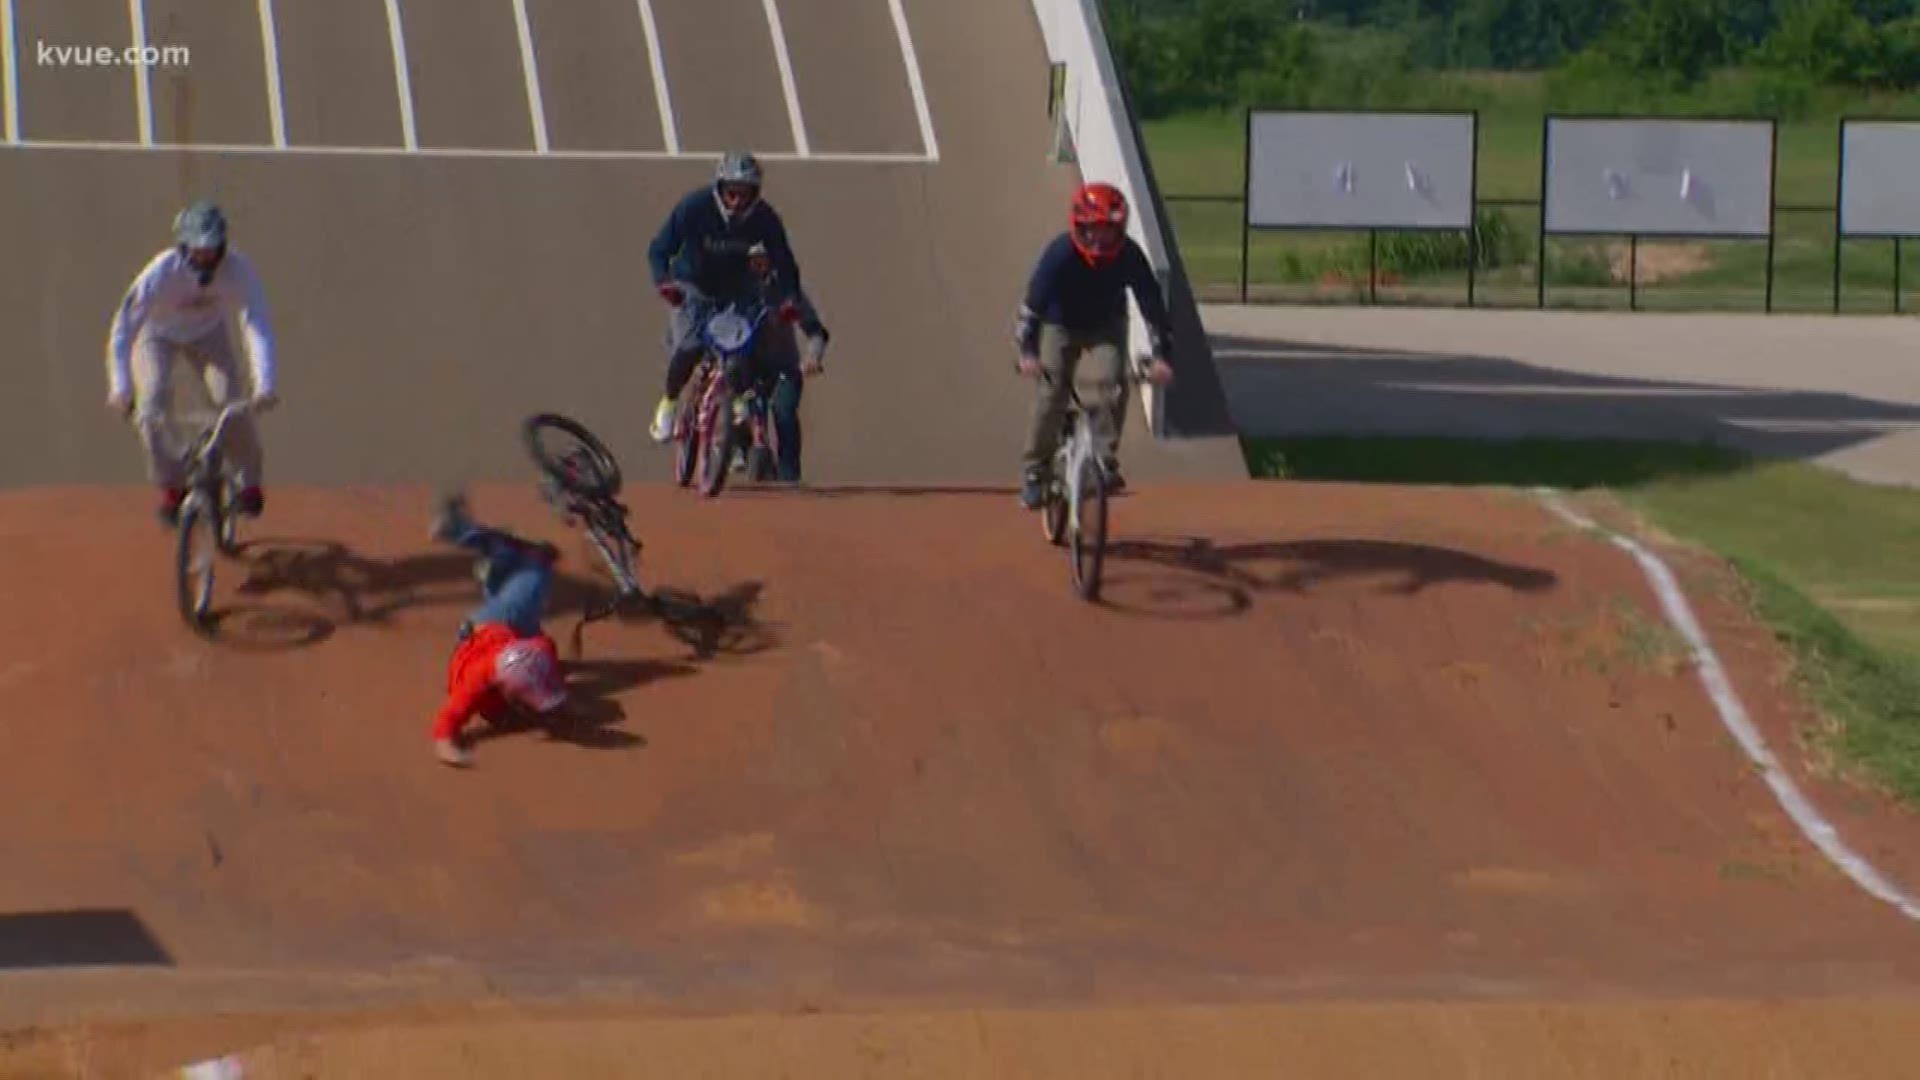 The Daybreak crew headed to the Central Texas BMX track in eastern Pflugerville to catch some gnarly slopes.